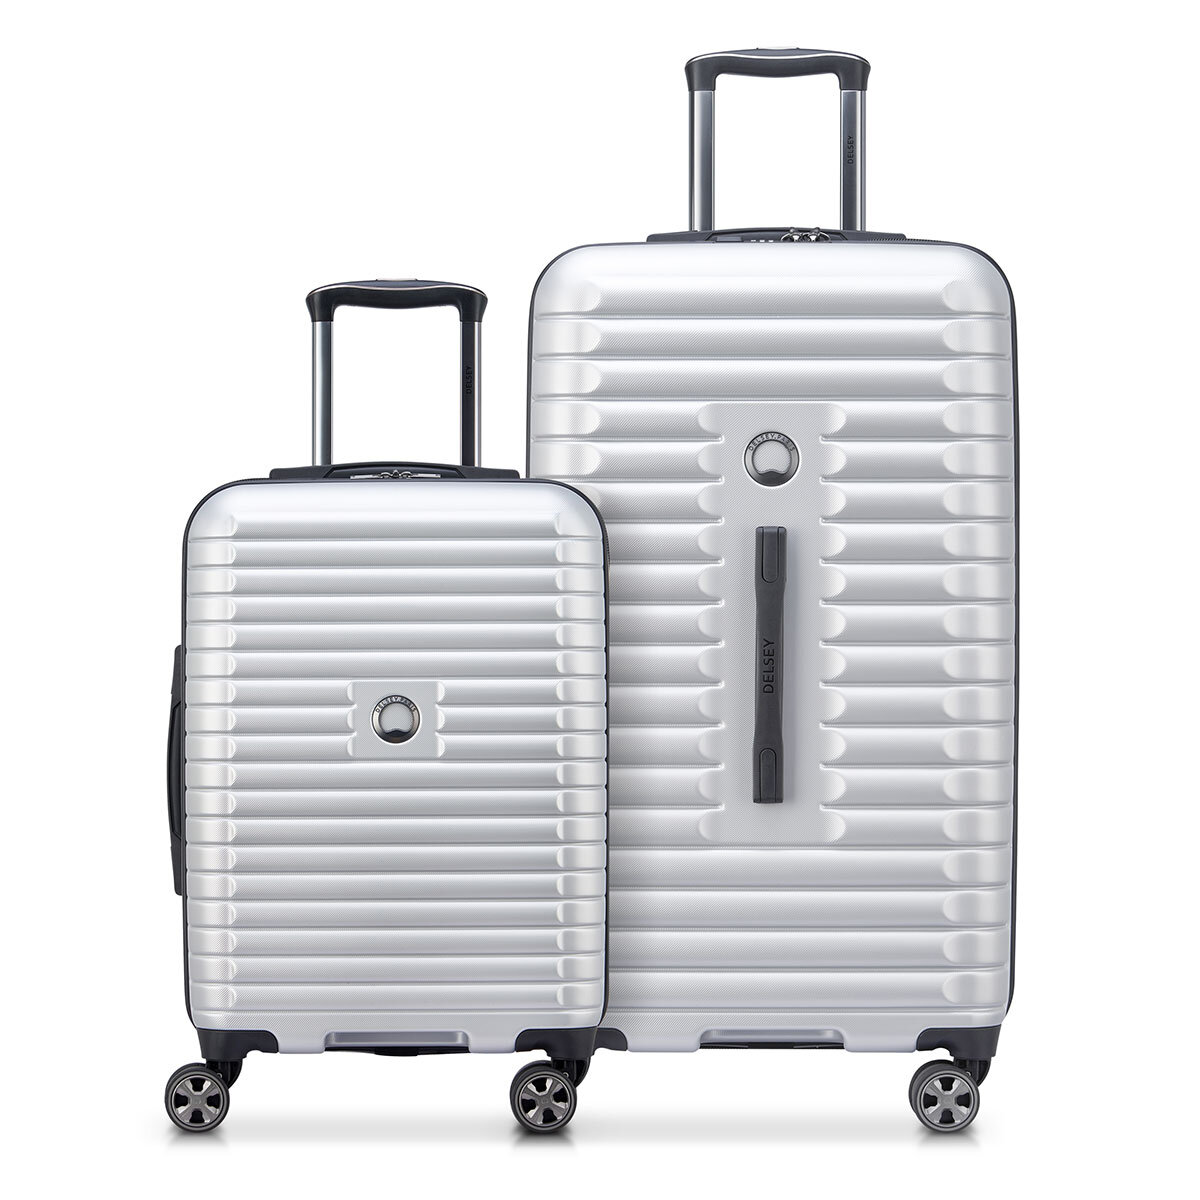 Delsey 2 Piece Hardside Trunk Set in 2 Colours | Costco UK